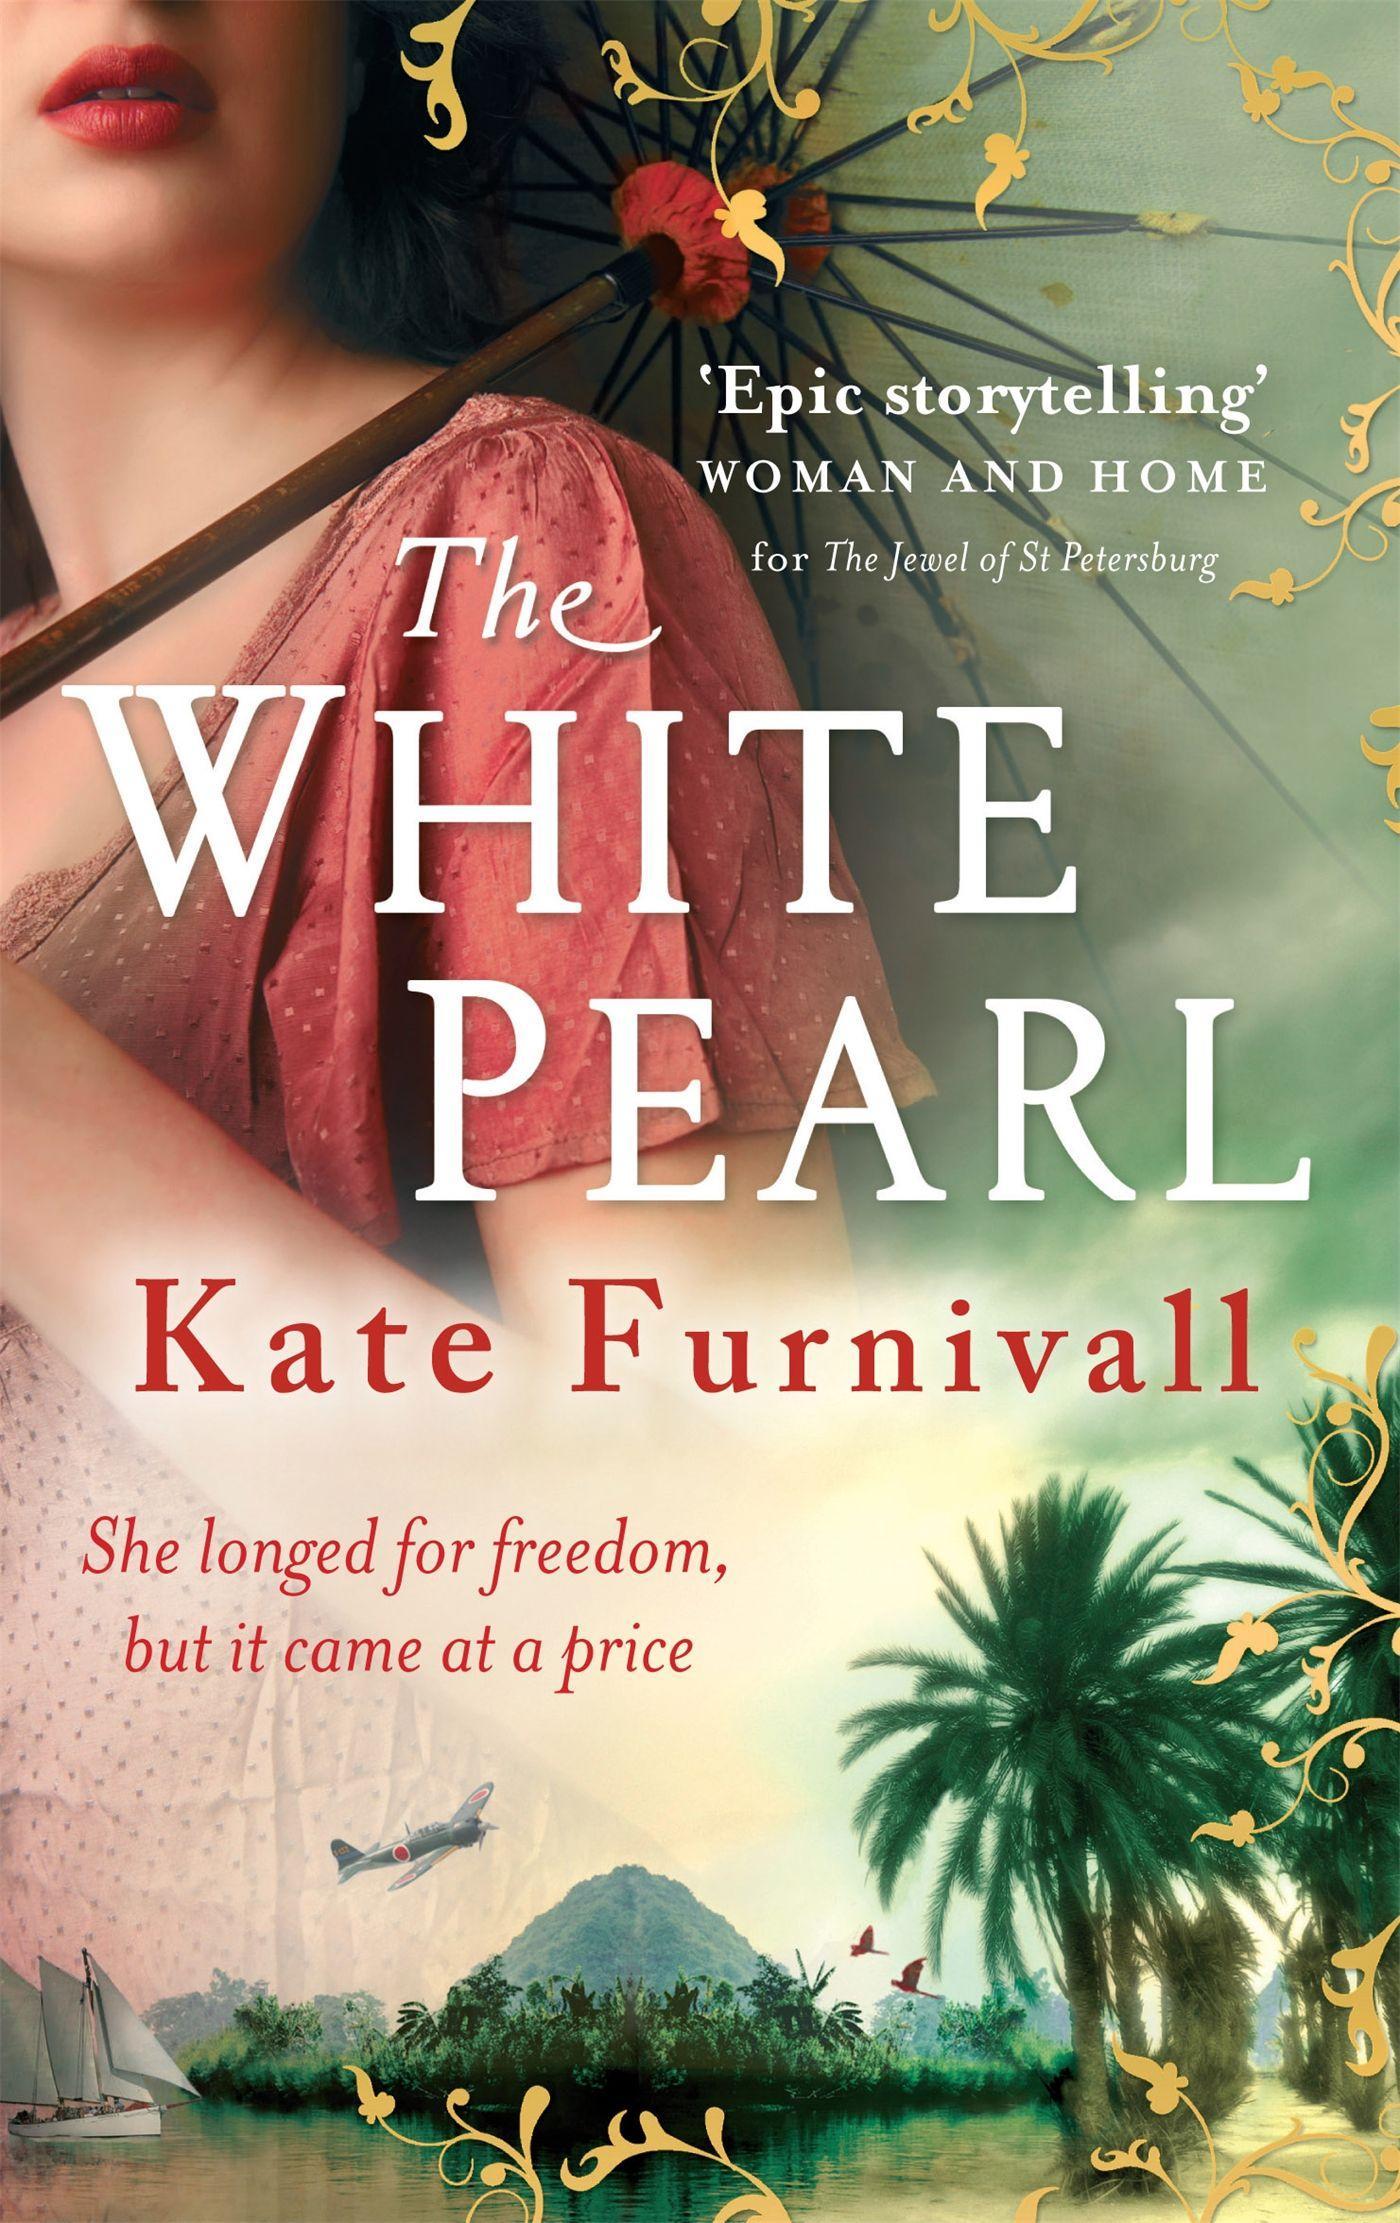 The White Pearl | 'Epic storytelling' Woman & Home | Kate Furnivall | Taschenbuch | 480 S. | Englisch | 2012 | Little, Brown Book Group | EAN 9780751543360 - Furnivall, Kate